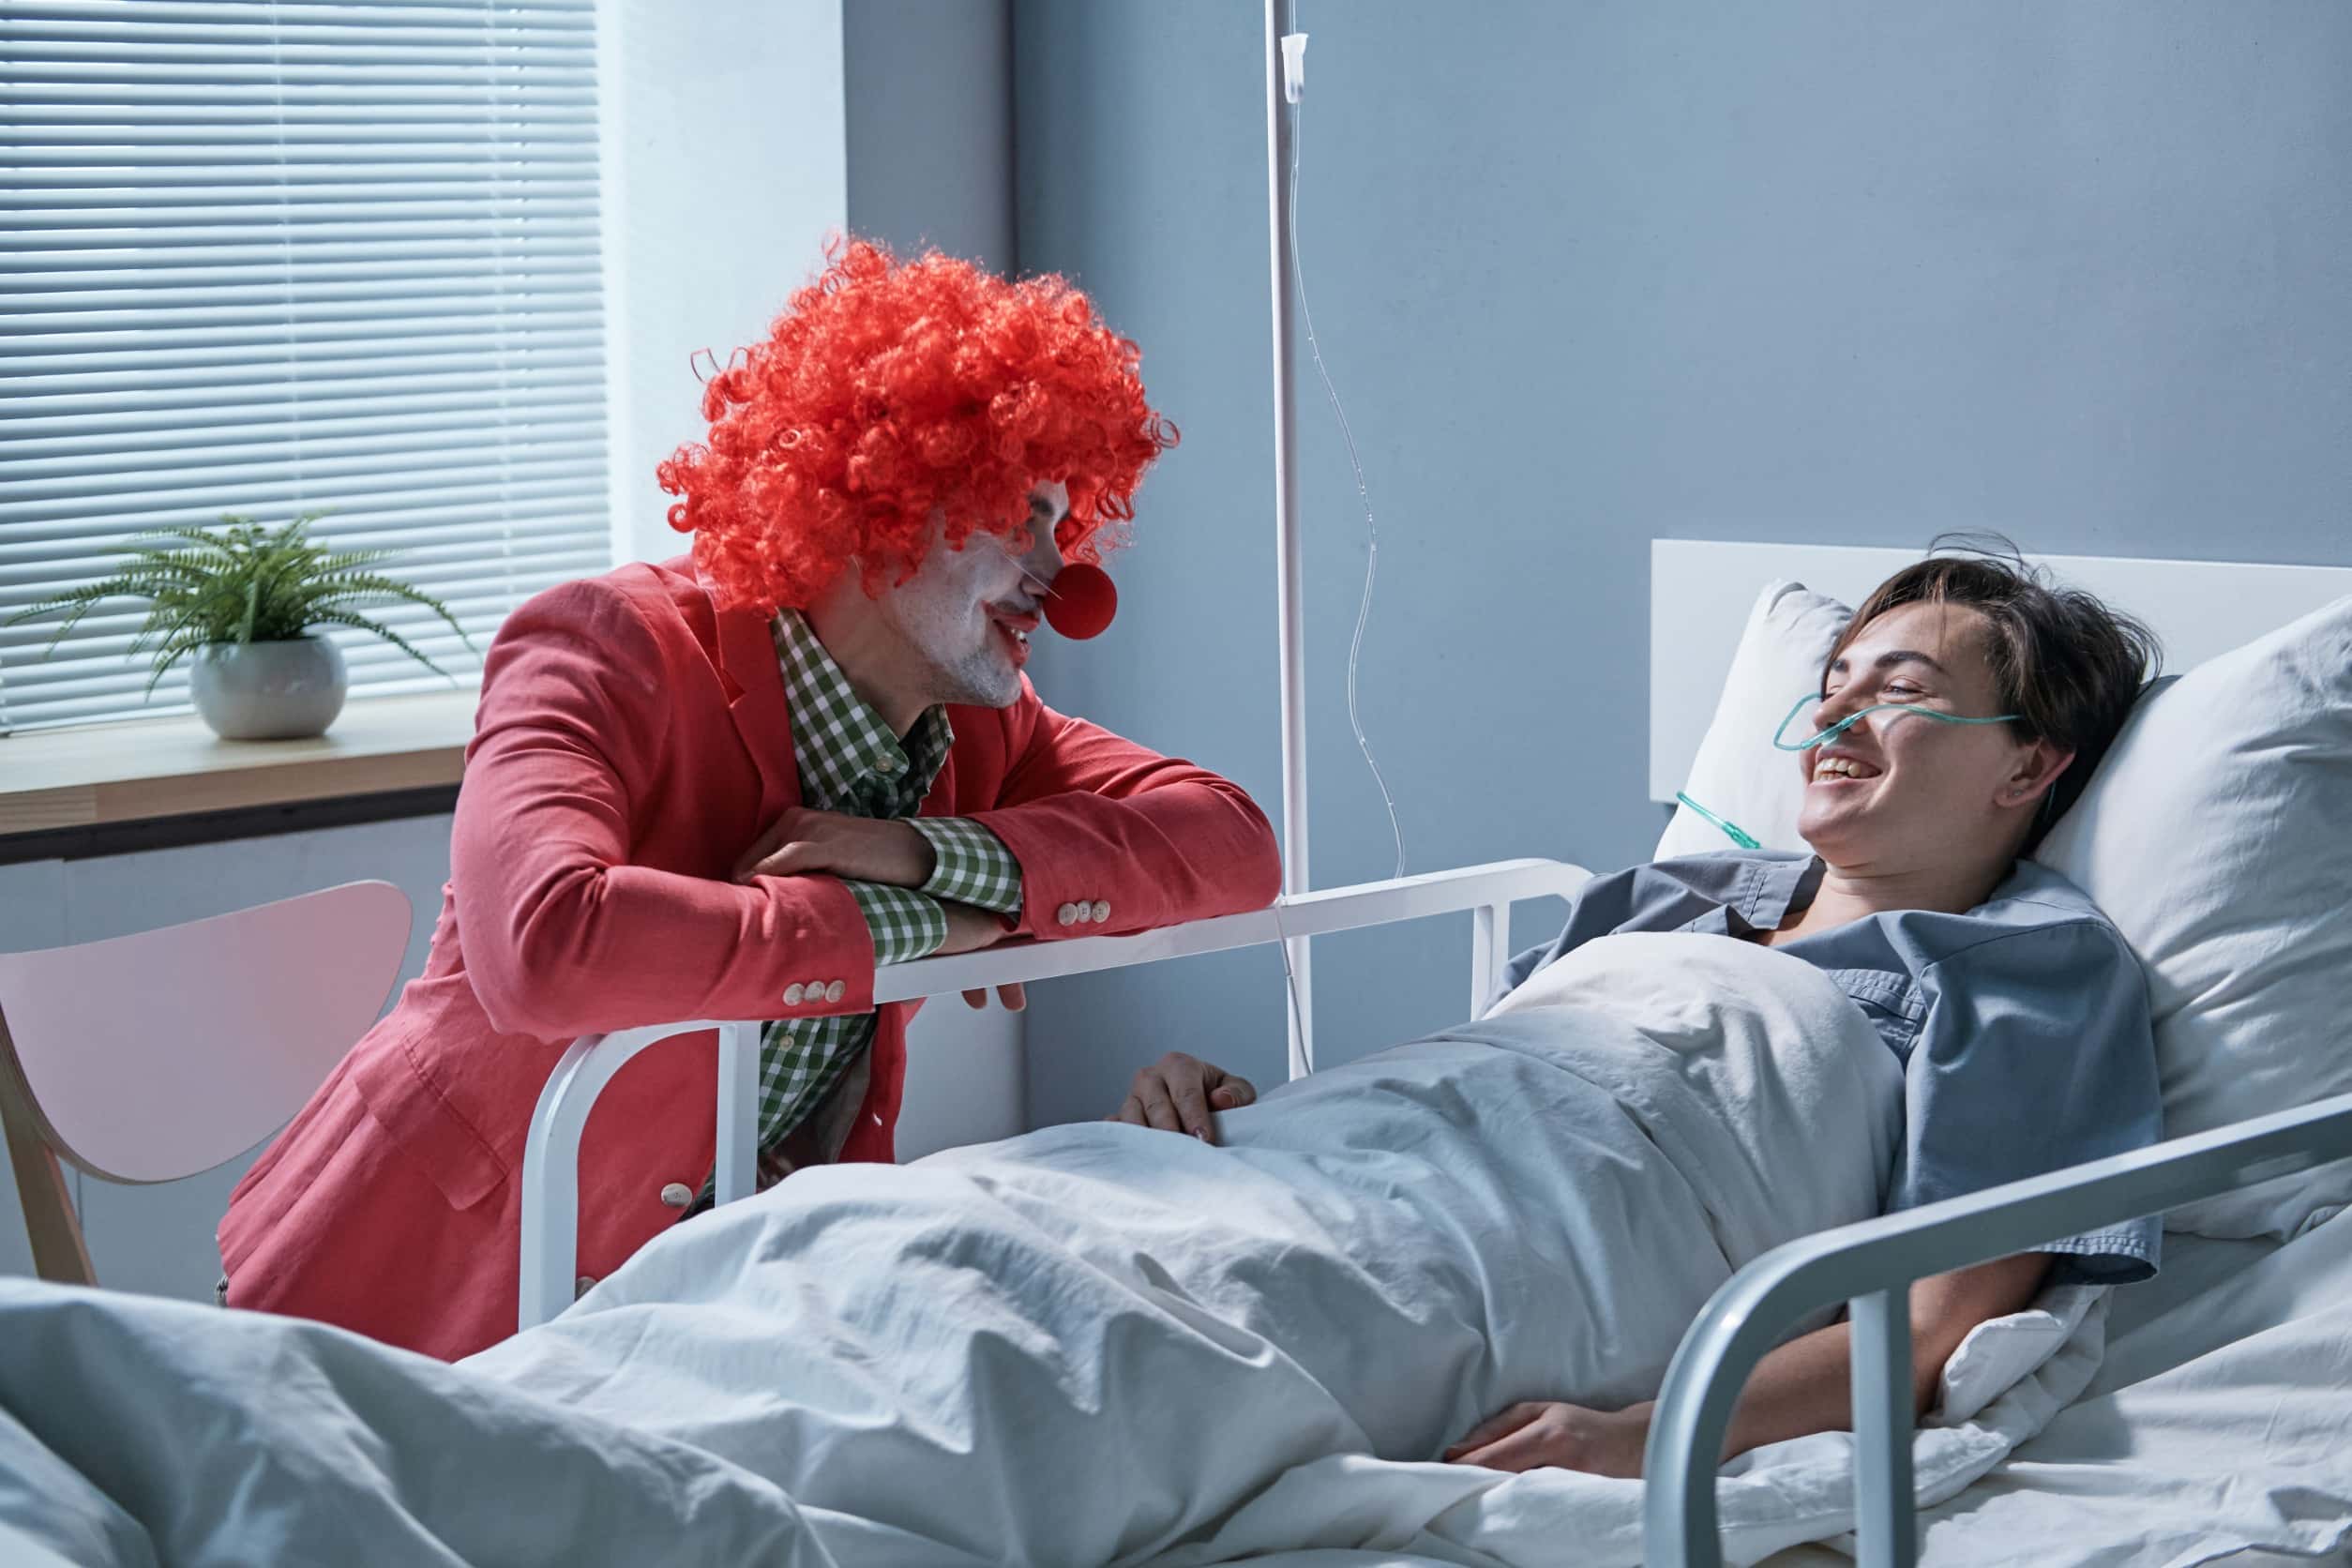 Clowns visit hospital patients to help boost the healing process.